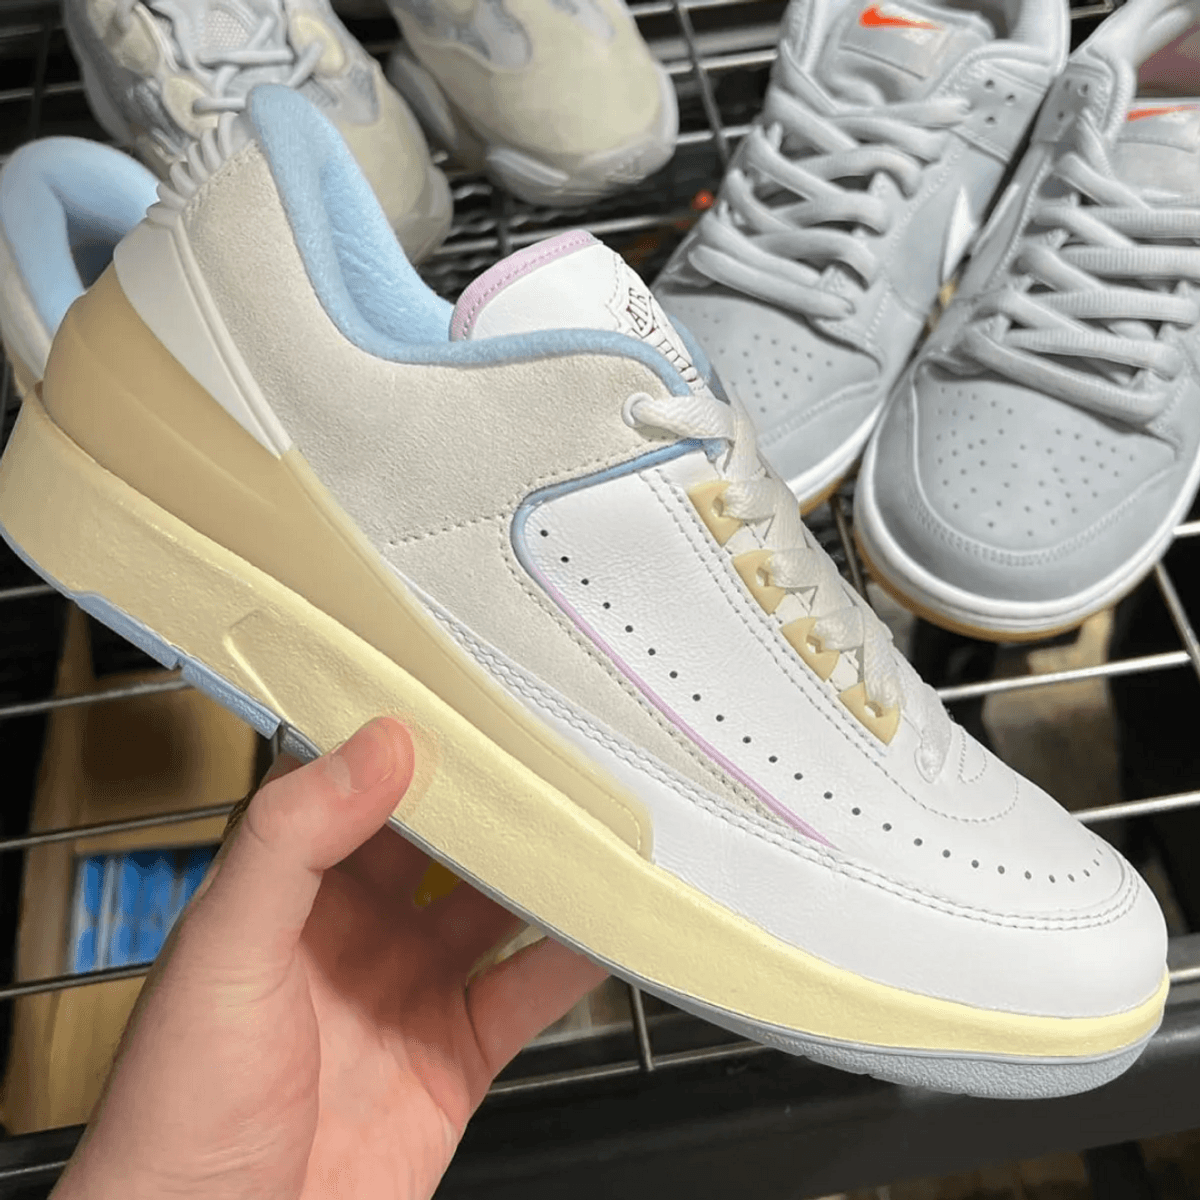 First Look At The Women's Exclusive Air Jordan 2 Low Look Up In The Air